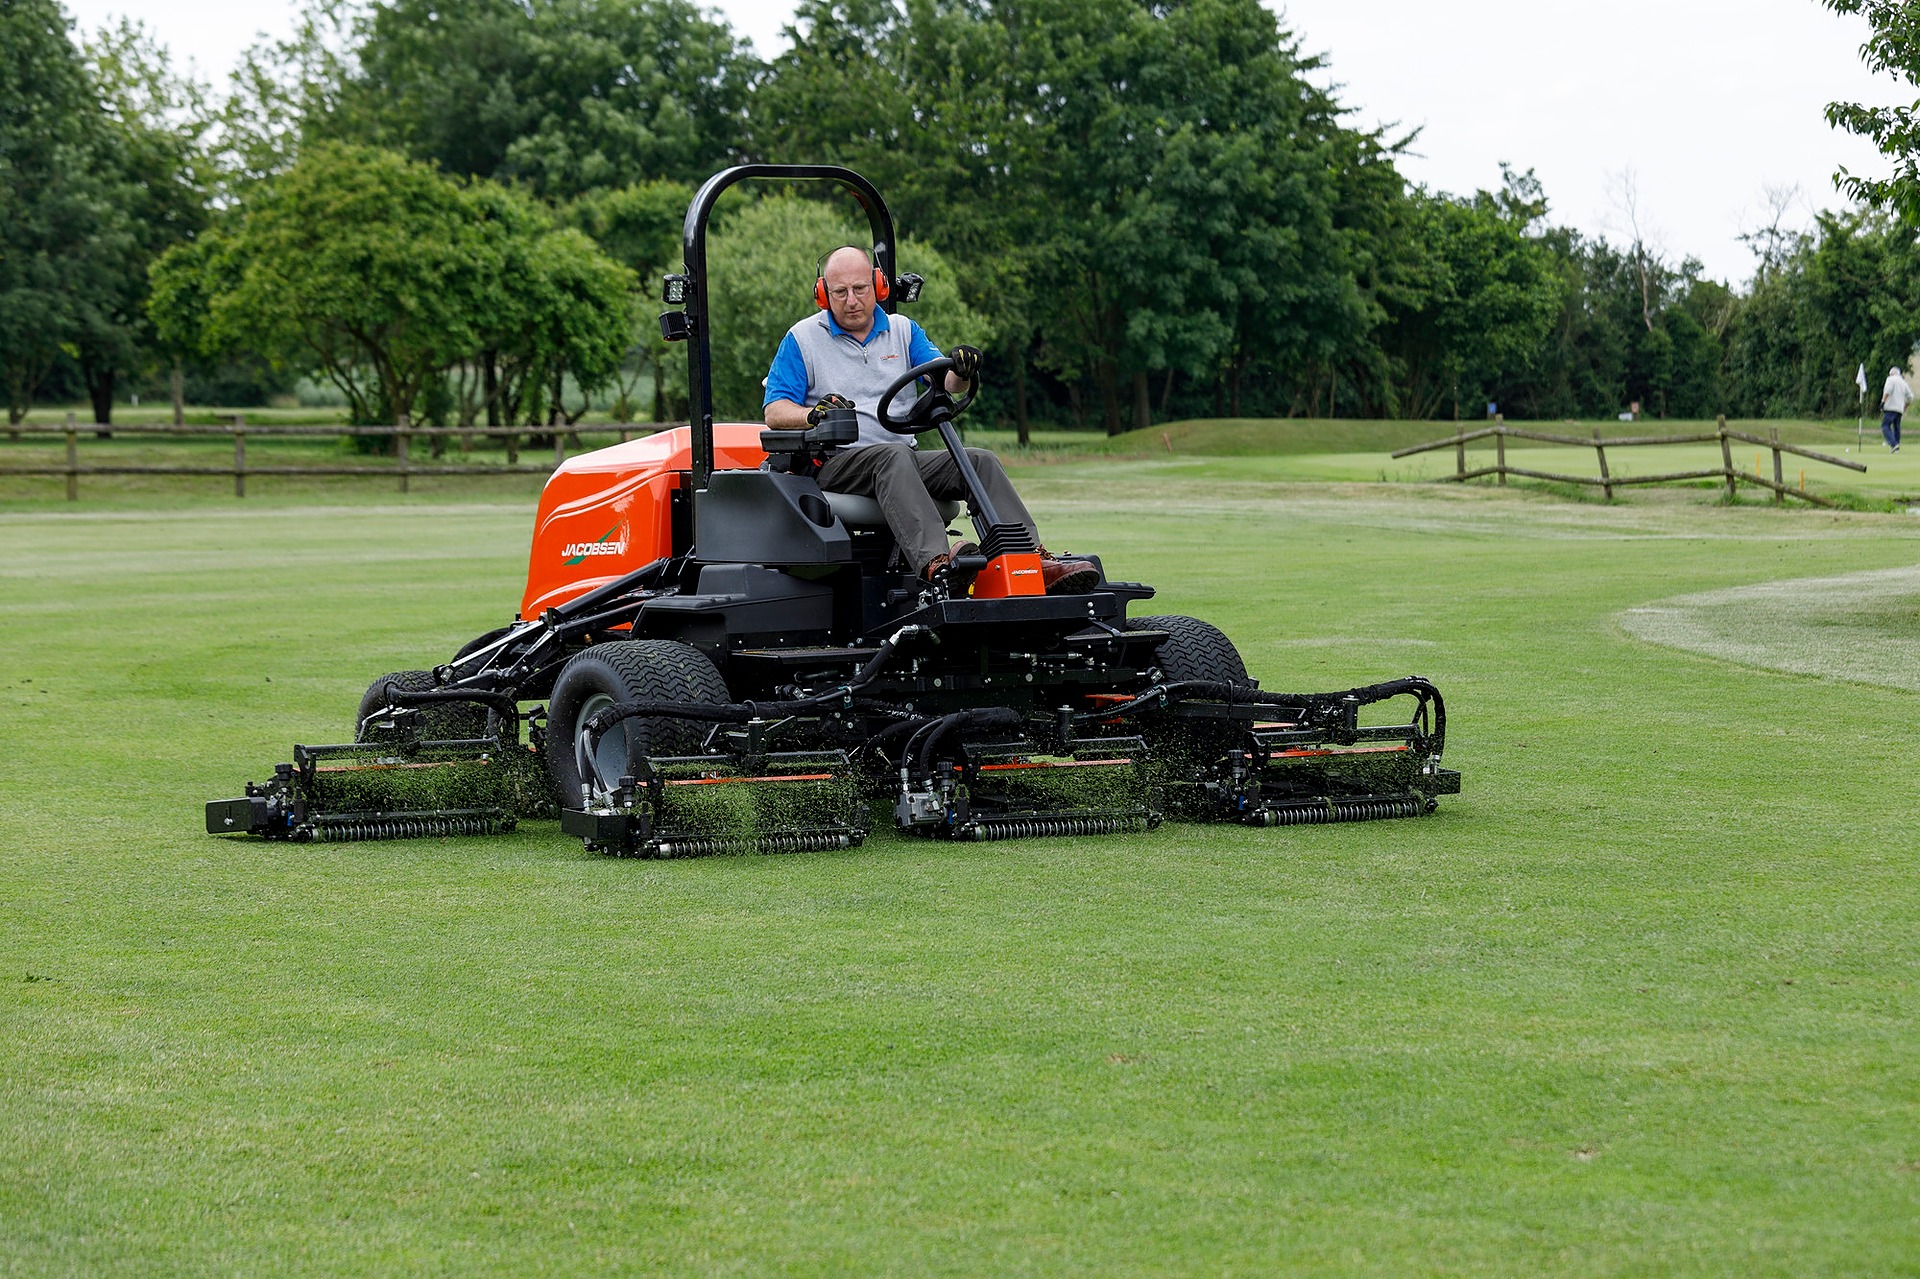 Jacobsen Turf on X: The F407 high capacity reel mower is productivity  personified with 7 cutting units working together to give you Jake's  signature cut. Find out more:  #greenkeepers  #golfcoursemanager #golfmower #